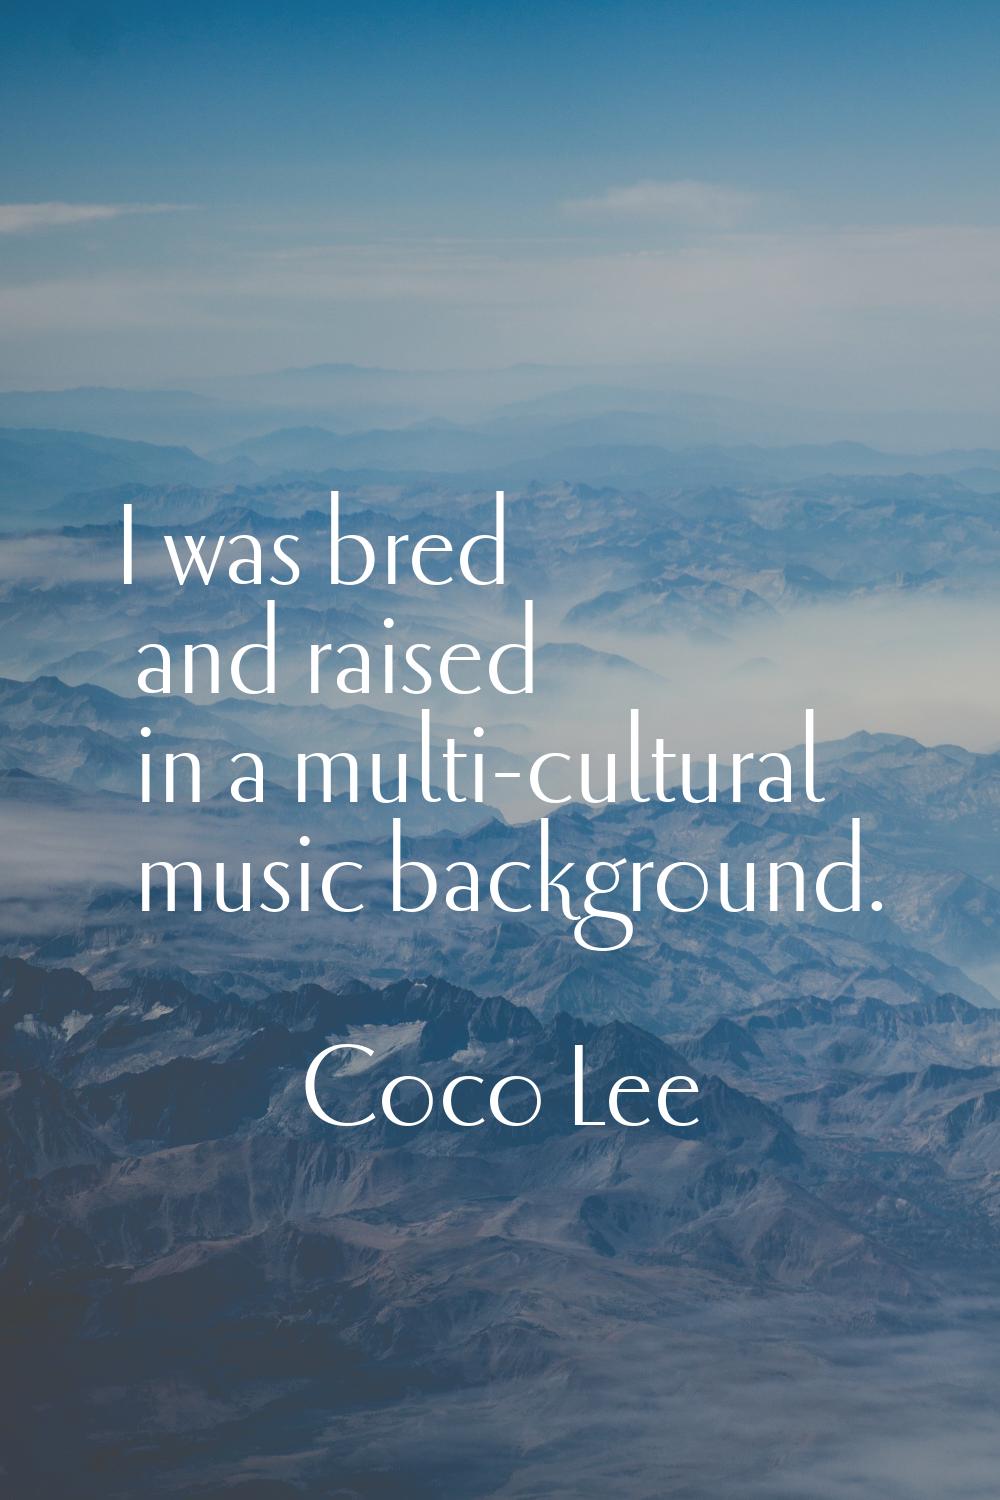 I was bred and raised in a multi-cultural music background.